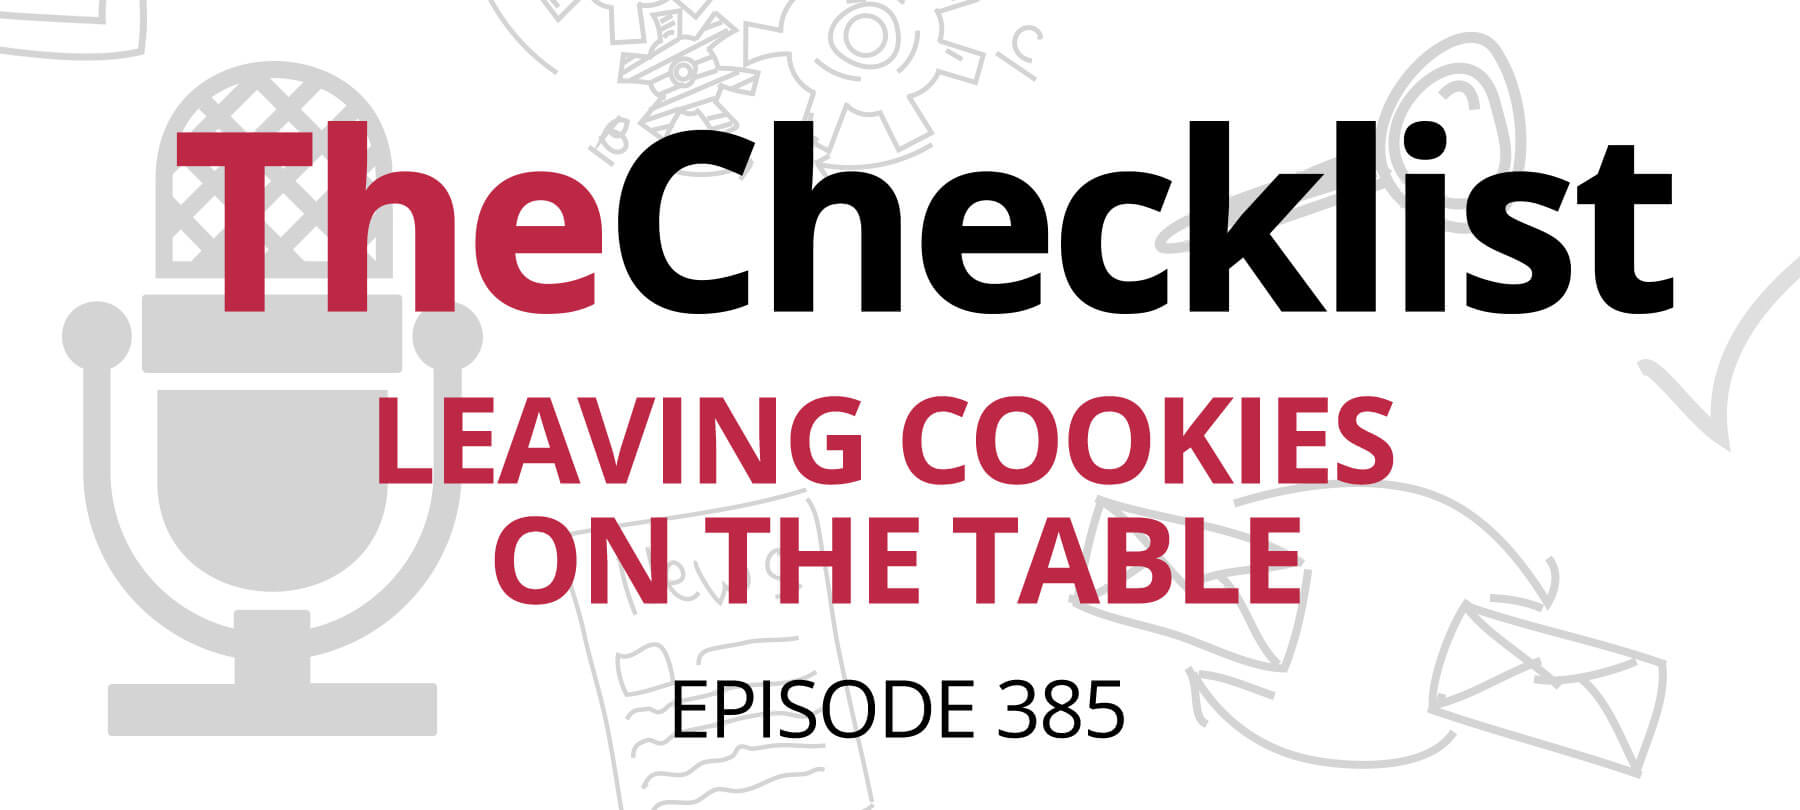 The Checklist episode 385 header, 'leaving cookies on the table' written in red text